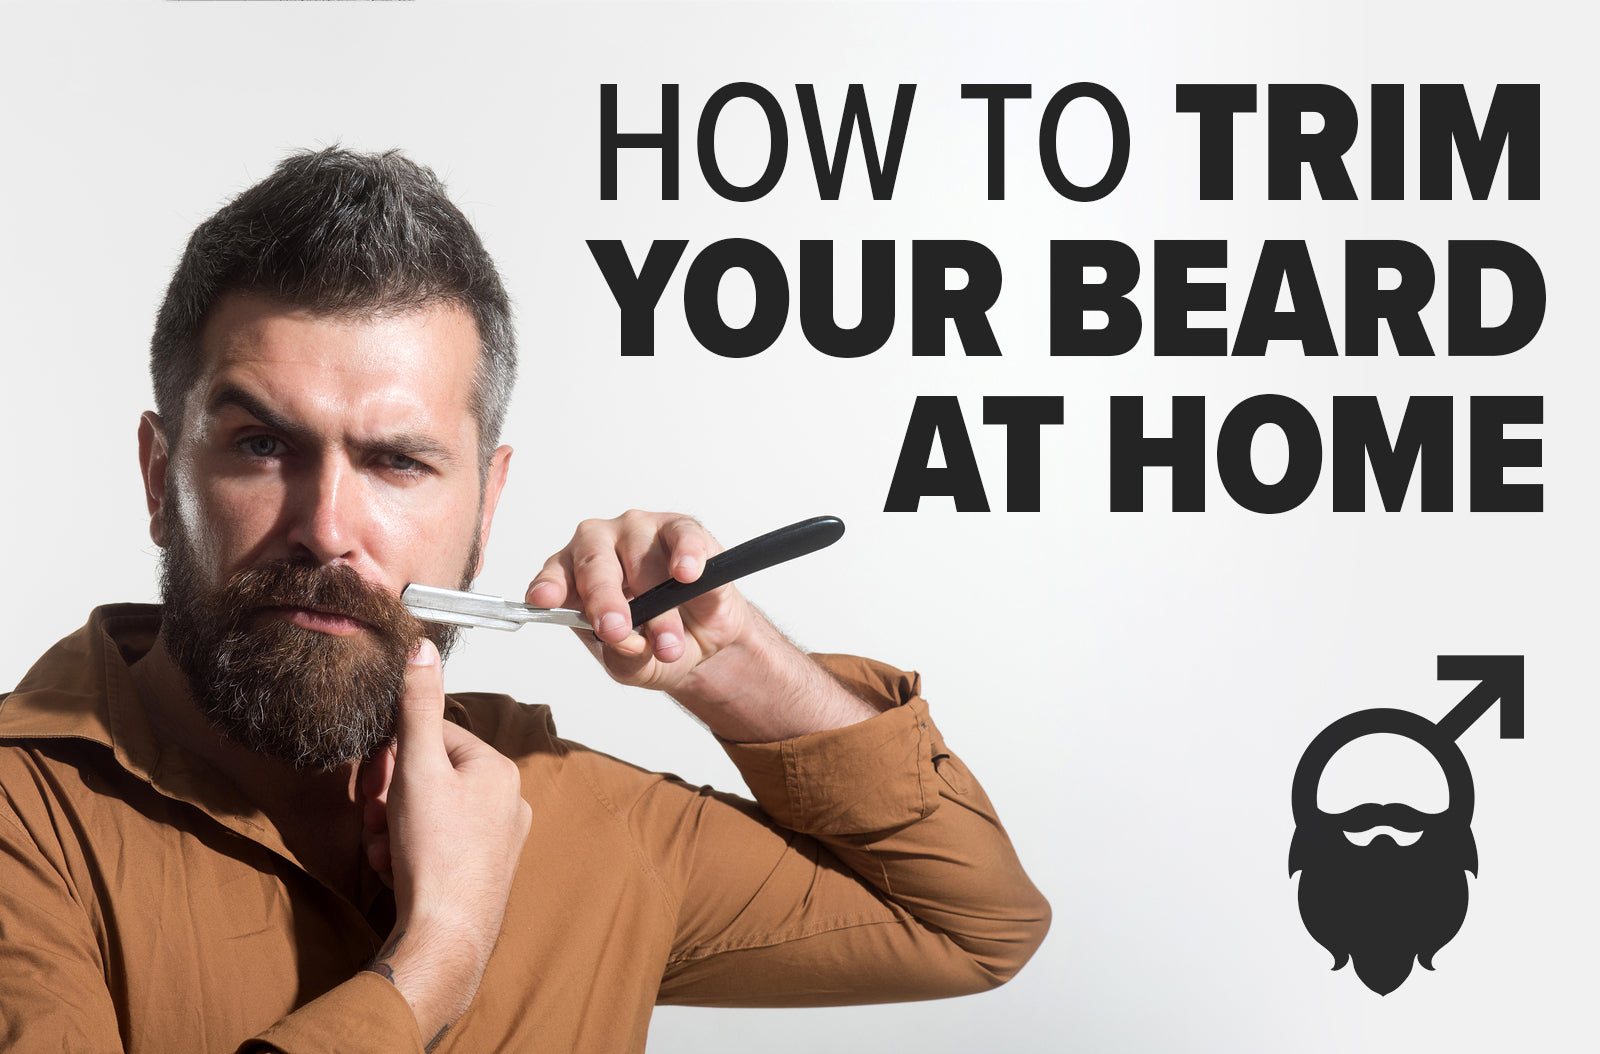 How to Trim a Beard: Maintaining Your Beard At Home